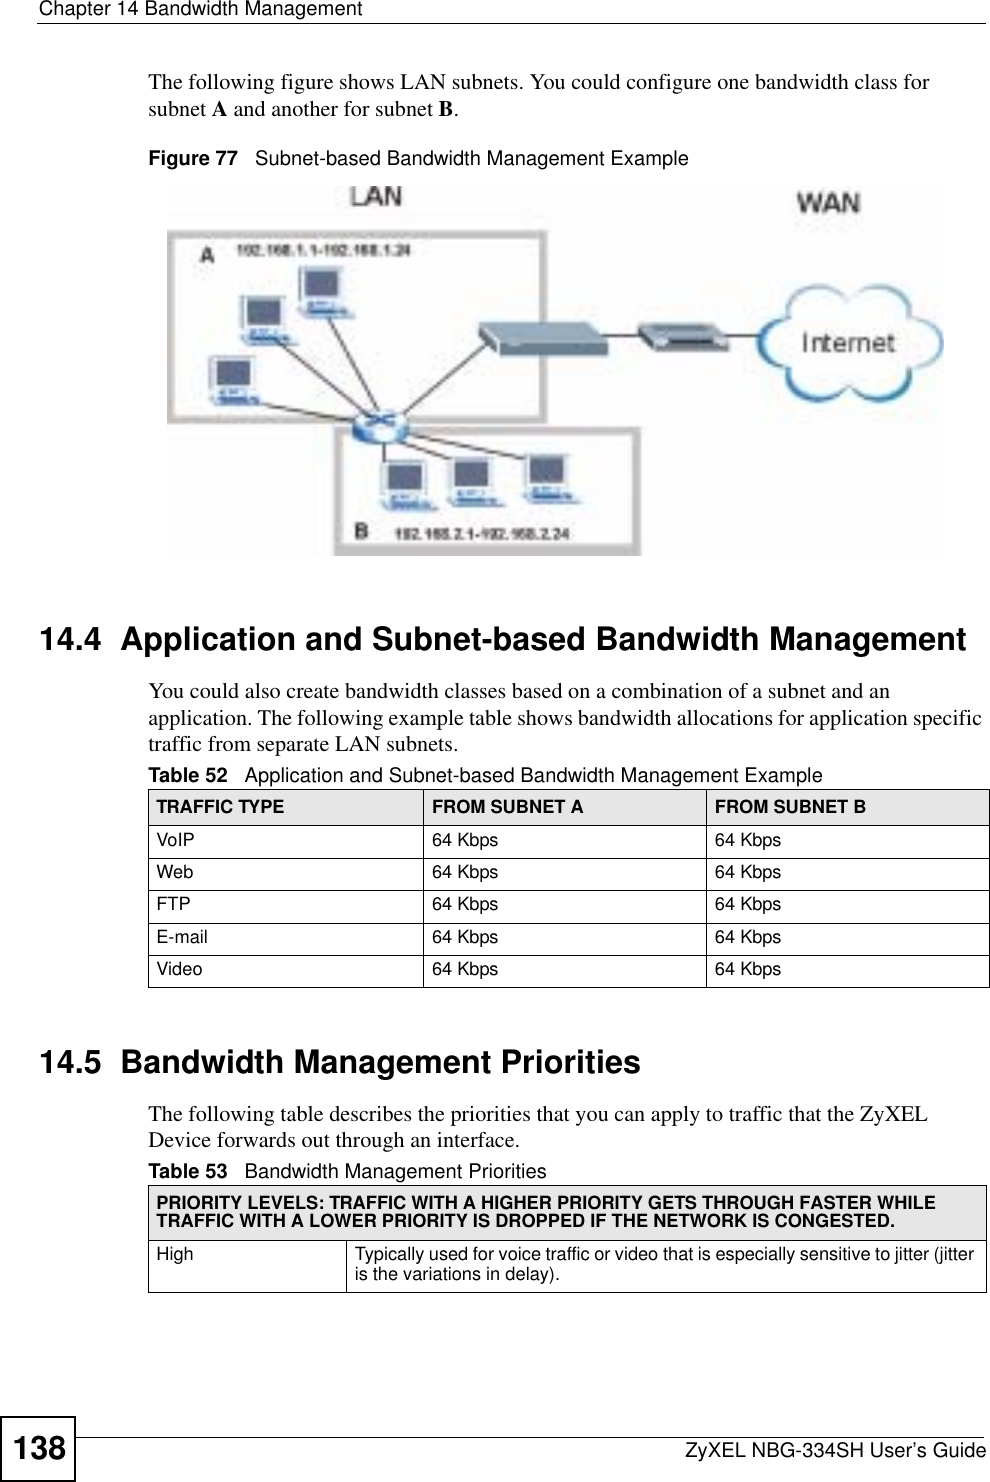 Chapter 14 Bandwidth ManagementZyXEL NBG-334SH User’s Guide138The following figure shows LAN subnets. You could configure one bandwidth class for subnet A and another for subnet B.Figure 77   Subnet-based Bandwidth Management Example14.4  Application and Subnet-based Bandwidth ManagementYou could also create bandwidth classes based on a combination of a subnet and an application. The following example table shows bandwidth allocations for application specific traffic from separate LAN subnets.14.5  Bandwidth Management Priorities  The following table describes the priorities that you can apply to traffic that the ZyXEL Device forwards out through an interface.Table 52   Application and Subnet-based Bandwidth Management Example TRAFFIC TYPE FROM SUBNET A FROM SUBNET BVoIP 64 Kbps 64 KbpsWeb 64 Kbps 64 KbpsFTP 64 Kbps 64 KbpsE-mail 64 Kbps 64 KbpsVideo 64 Kbps 64 KbpsTable 53   Bandwidth Management PrioritiesPRIORITY LEVELS: TRAFFIC WITH A HIGHER PRIORITY GETS THROUGH FASTER WHILE TRAFFIC WITH A LOWER PRIORITY IS DROPPED IF THE NETWORK IS CONGESTED.High Typically used for voice traffic or video that is especially sensitive to jitter (jitter is the variations in delay).